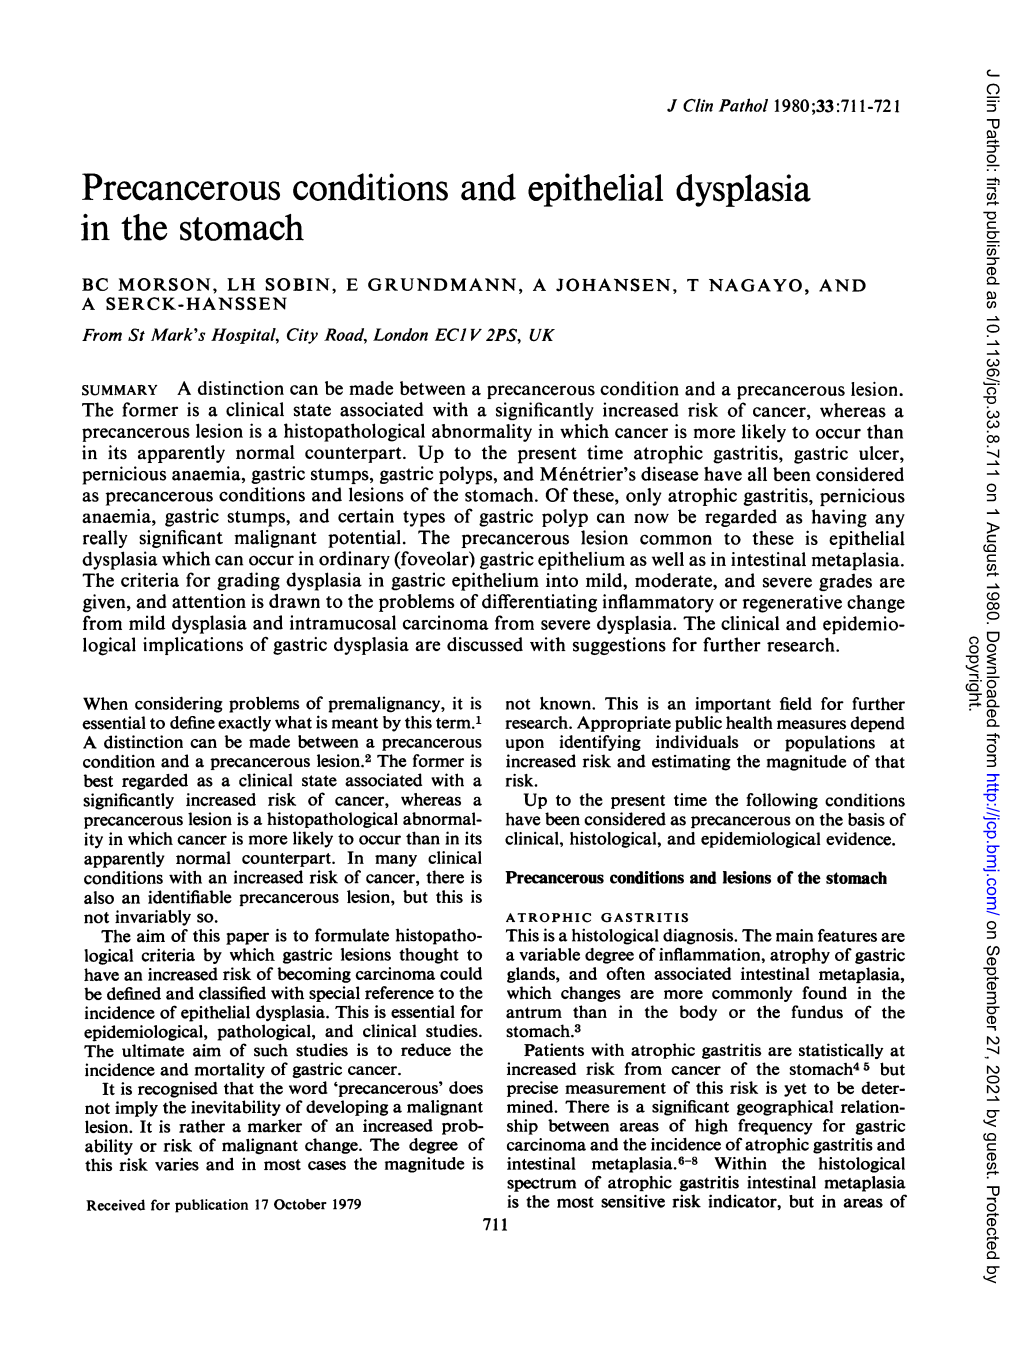 Precancerous Conditions and Epithelial Dysplasia in the Stomach